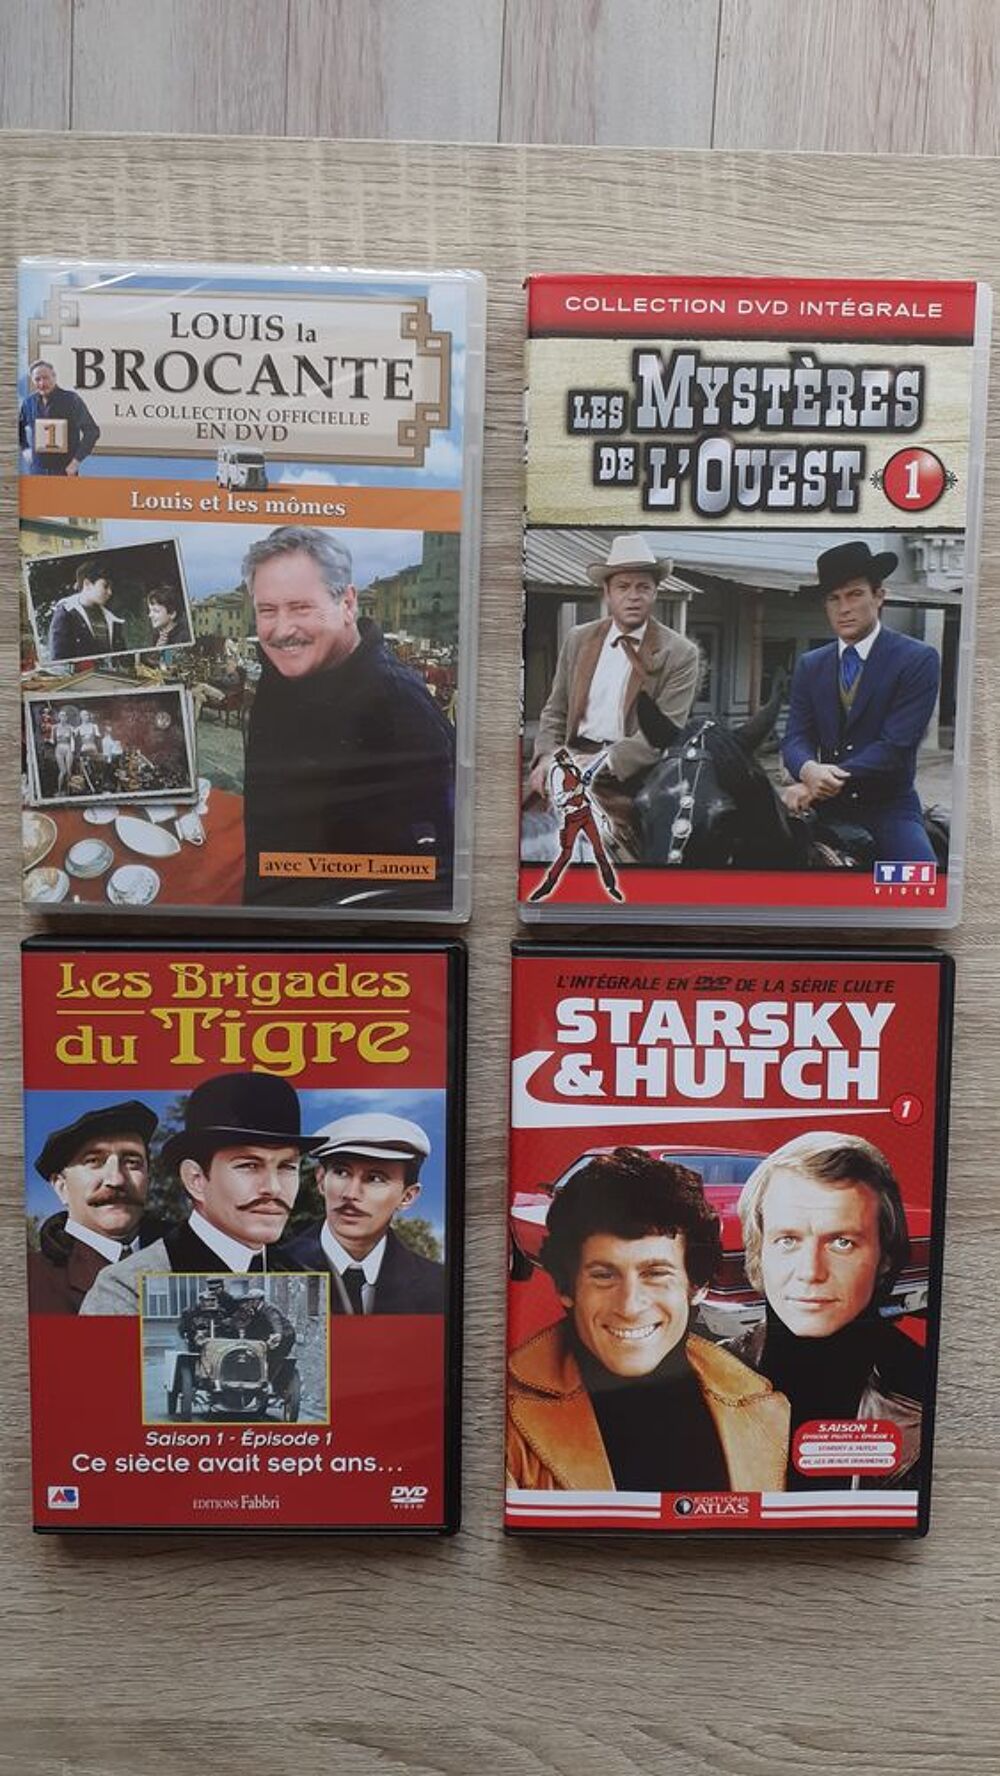 STARSKY&amp;HUTCH+Brigades d Tigre+MYSTERES OUEST+Louis Brocante 